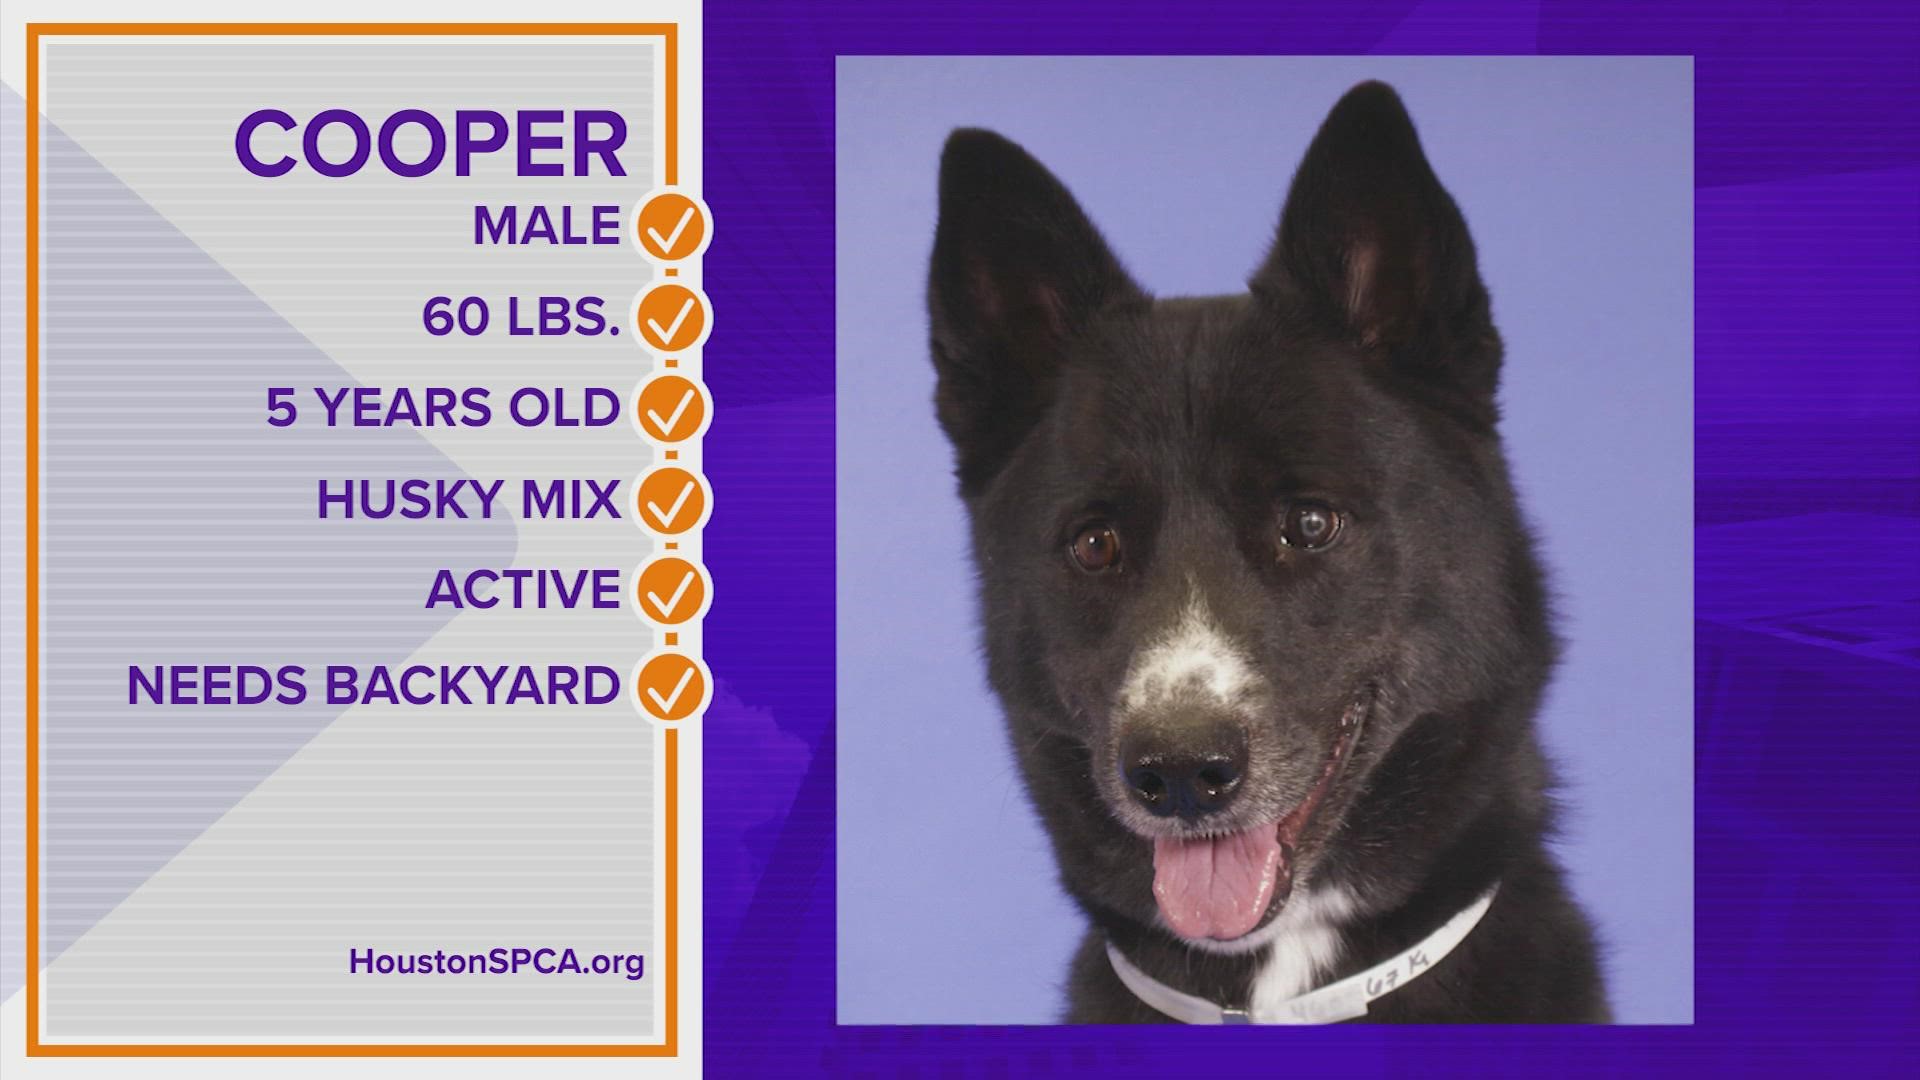 Cooper could be your furry 'accountabili-buddy' for 2022 and many years to come. Learn more about him and other pets at houstonspca.org.